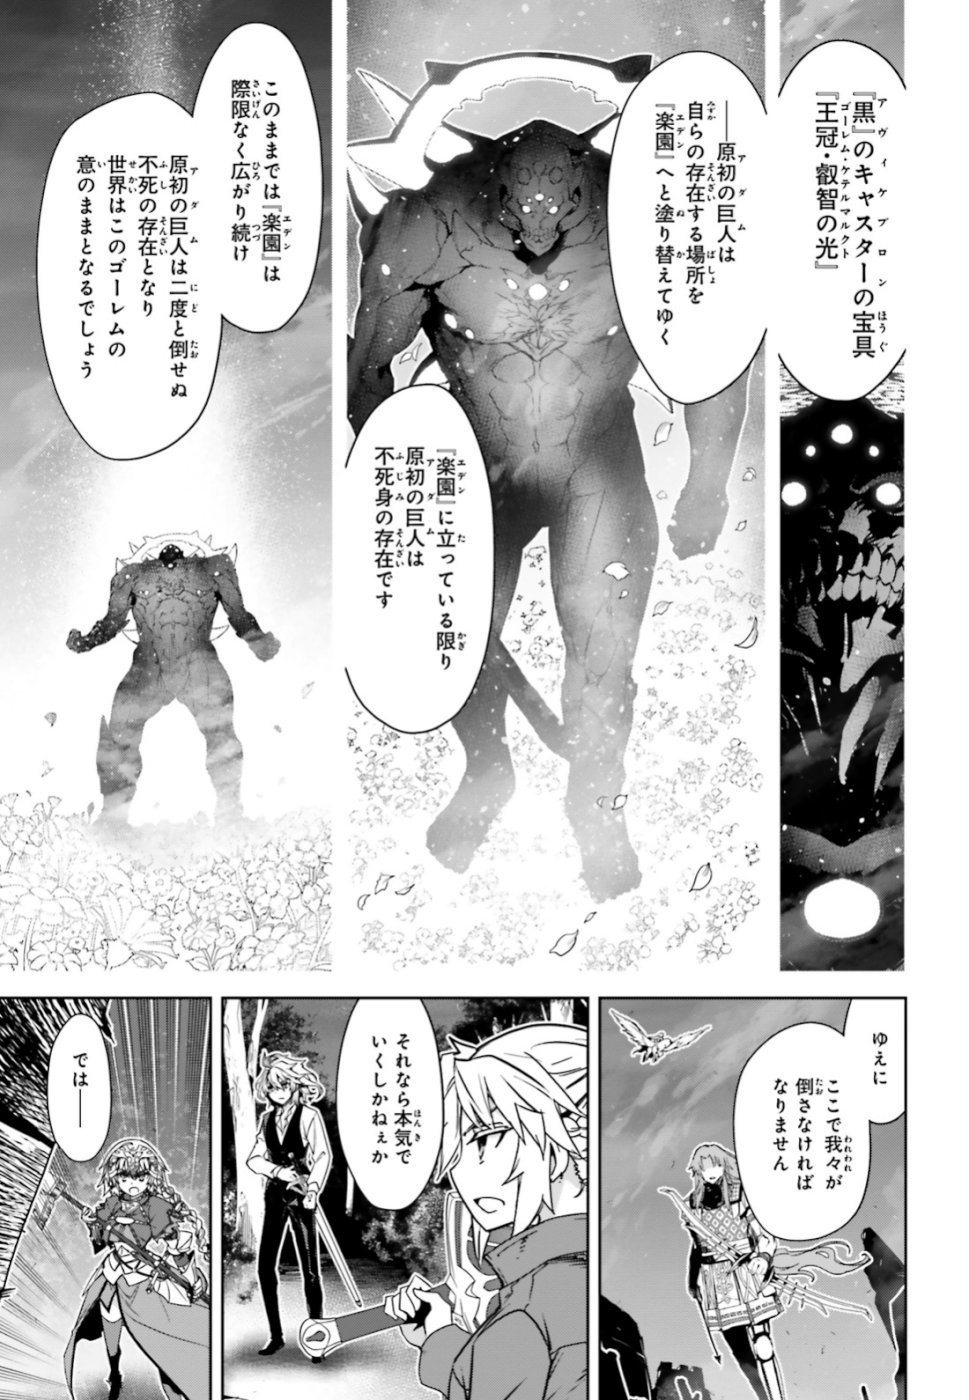 Fate-Apocrypha - Chapter 36 - Page 3